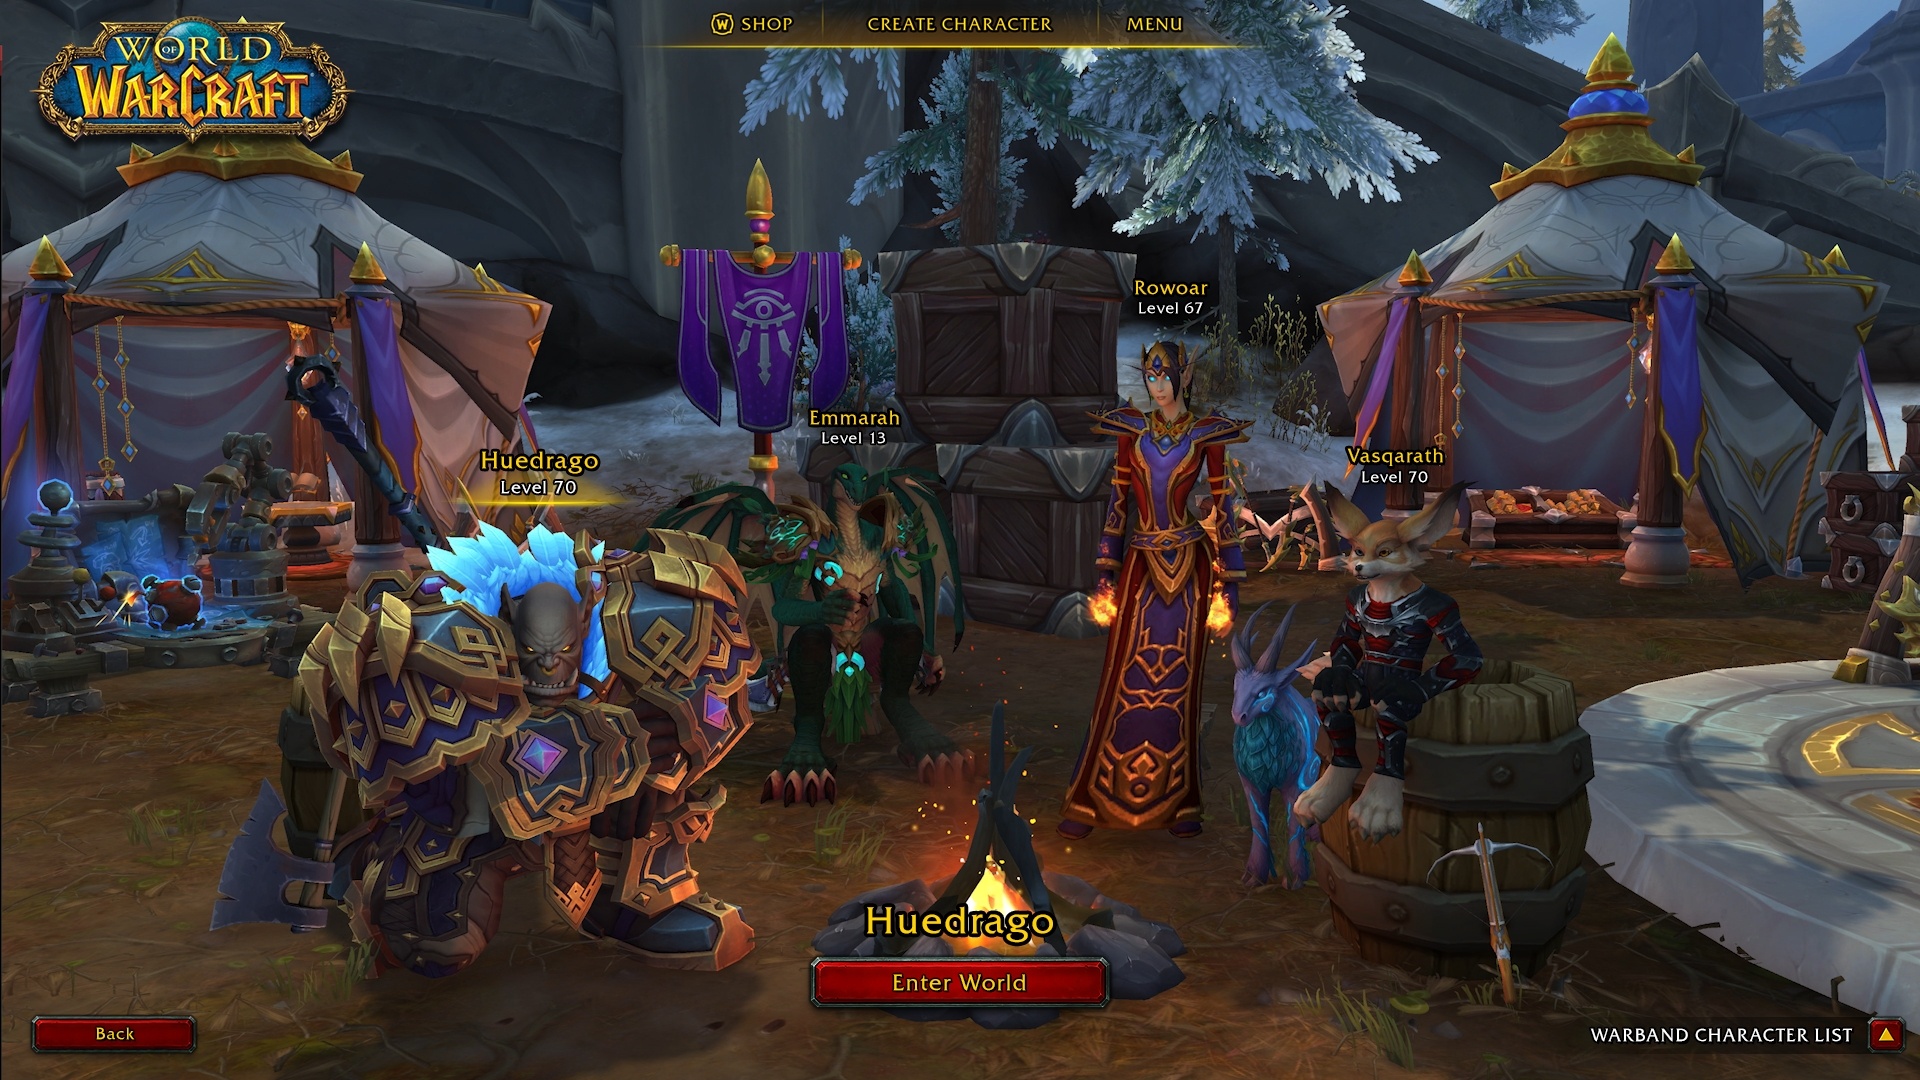 World of Warcraft: Some Major The War Within Features Coming